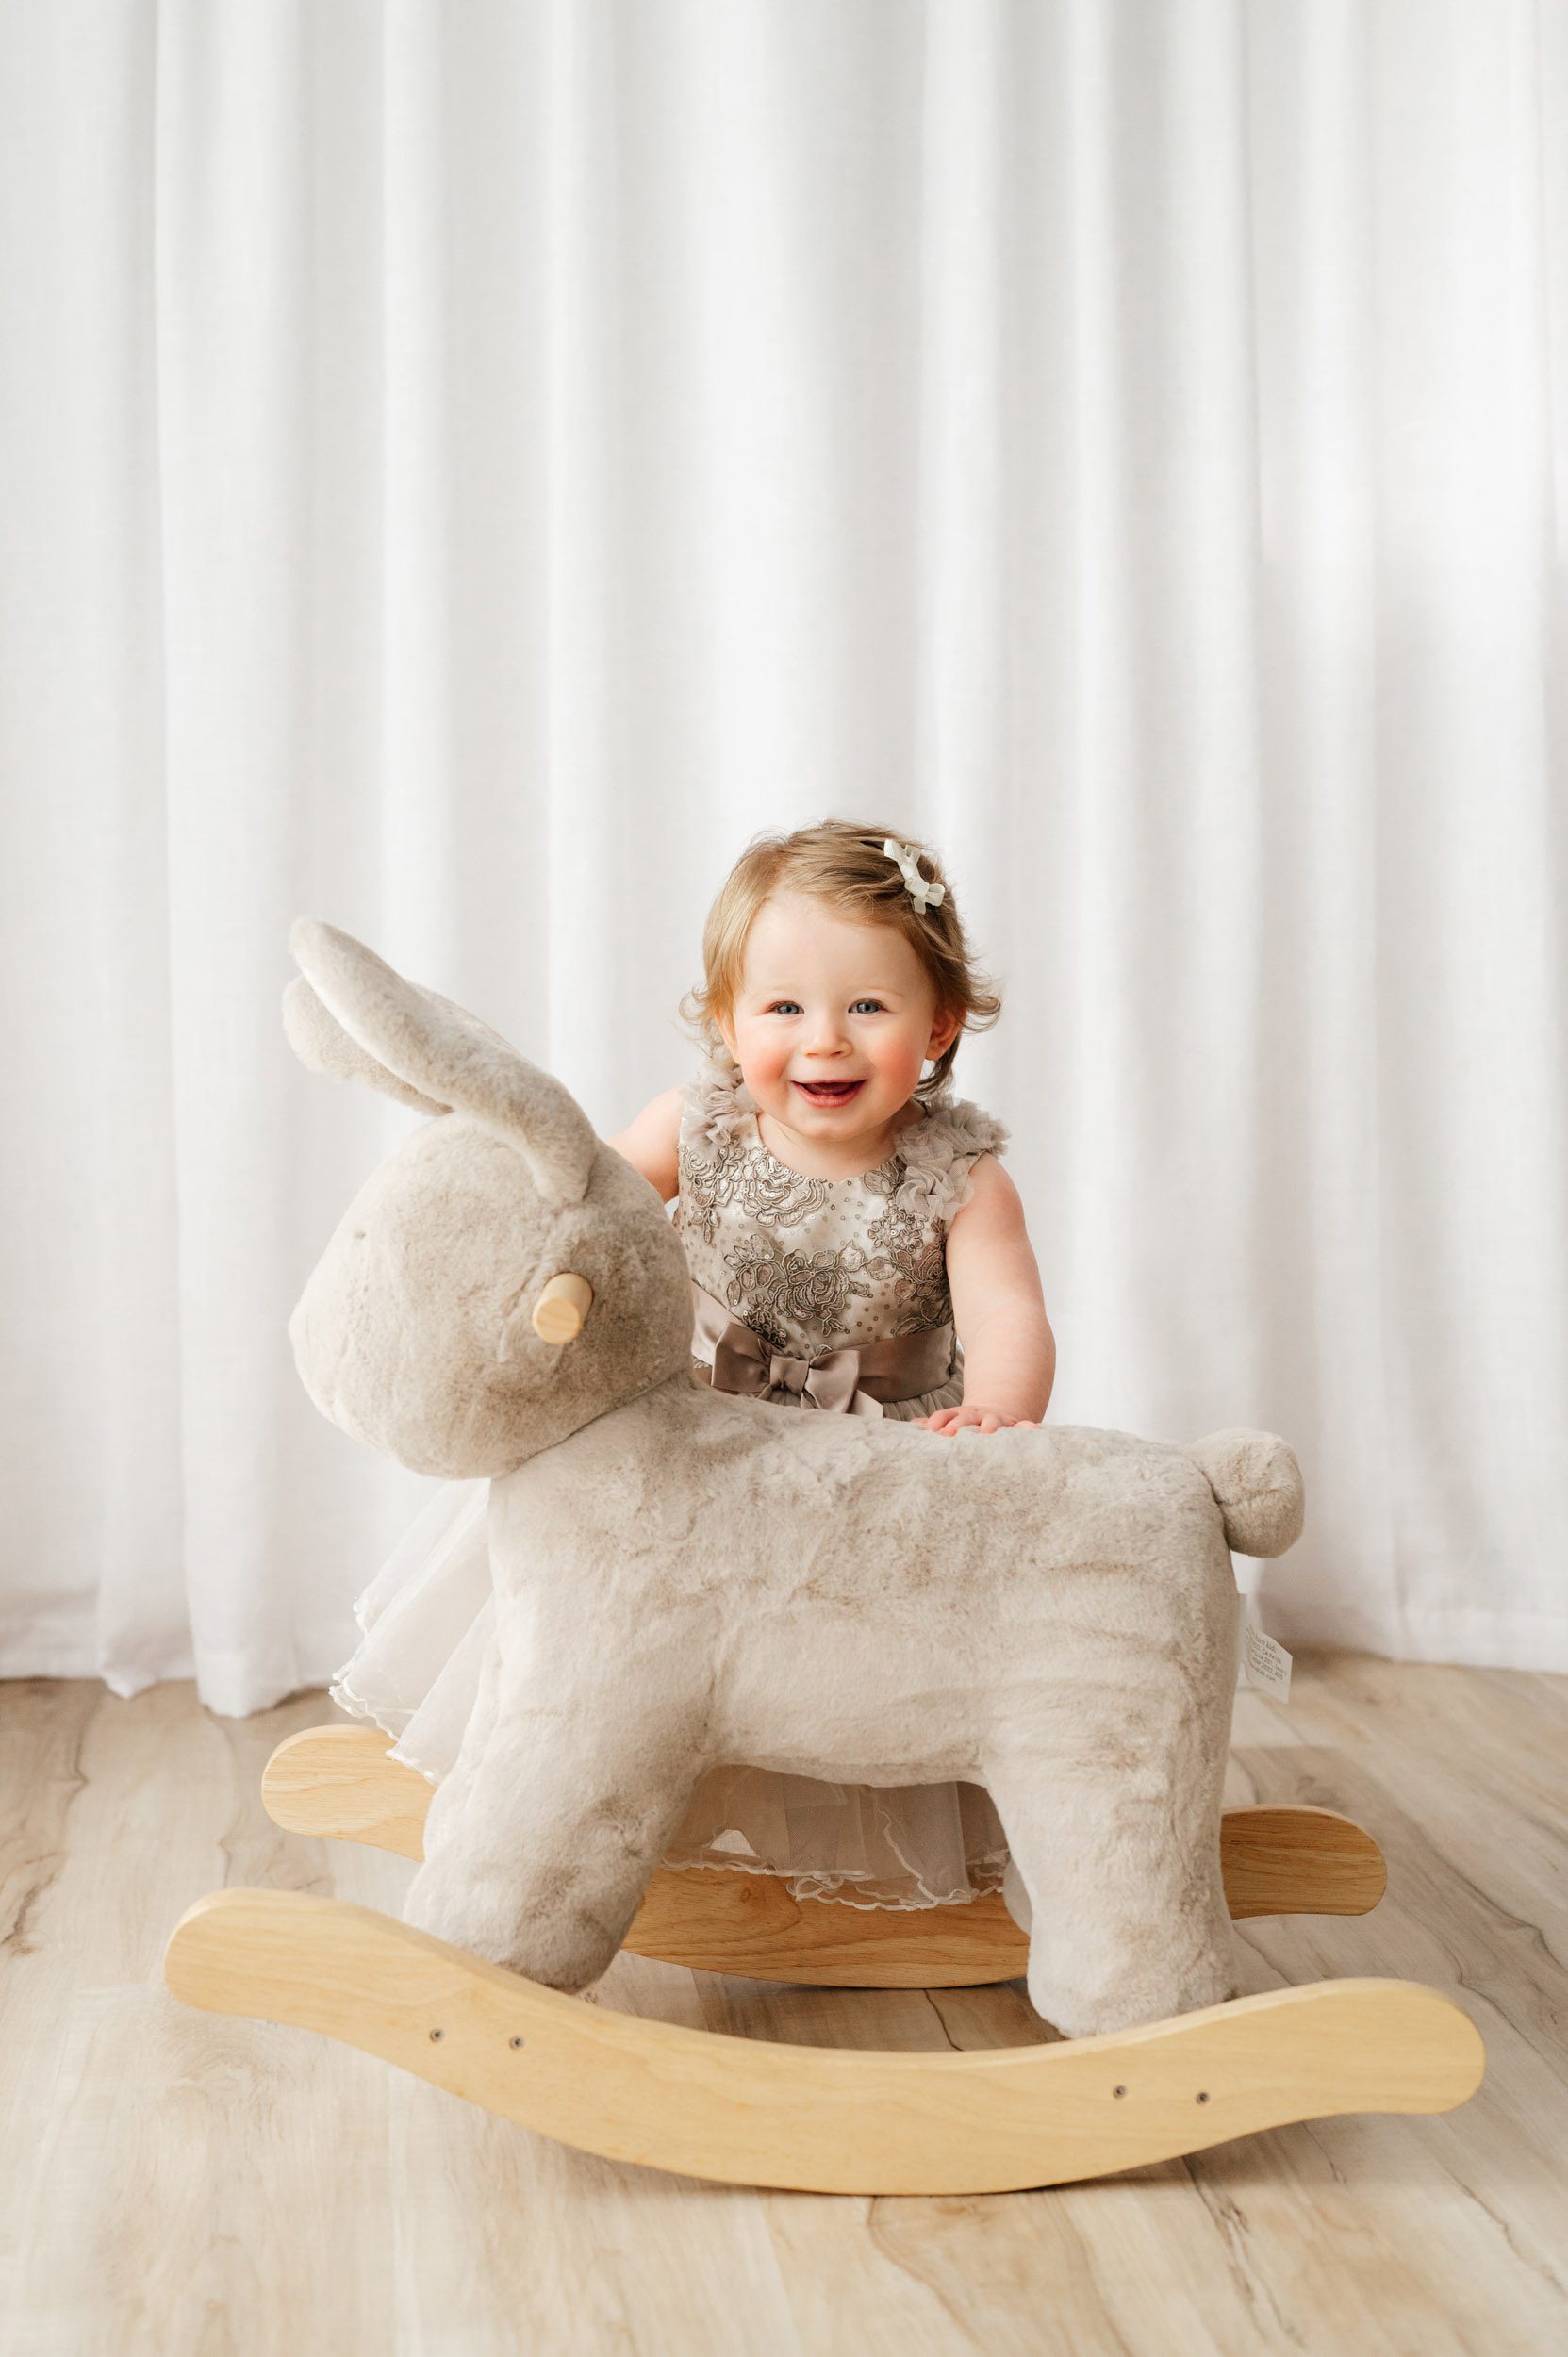 a young girl standing behind a bunny rocker toy and looking toward the camera and laughing as she rocks the bunny during a 1st birthday photos session